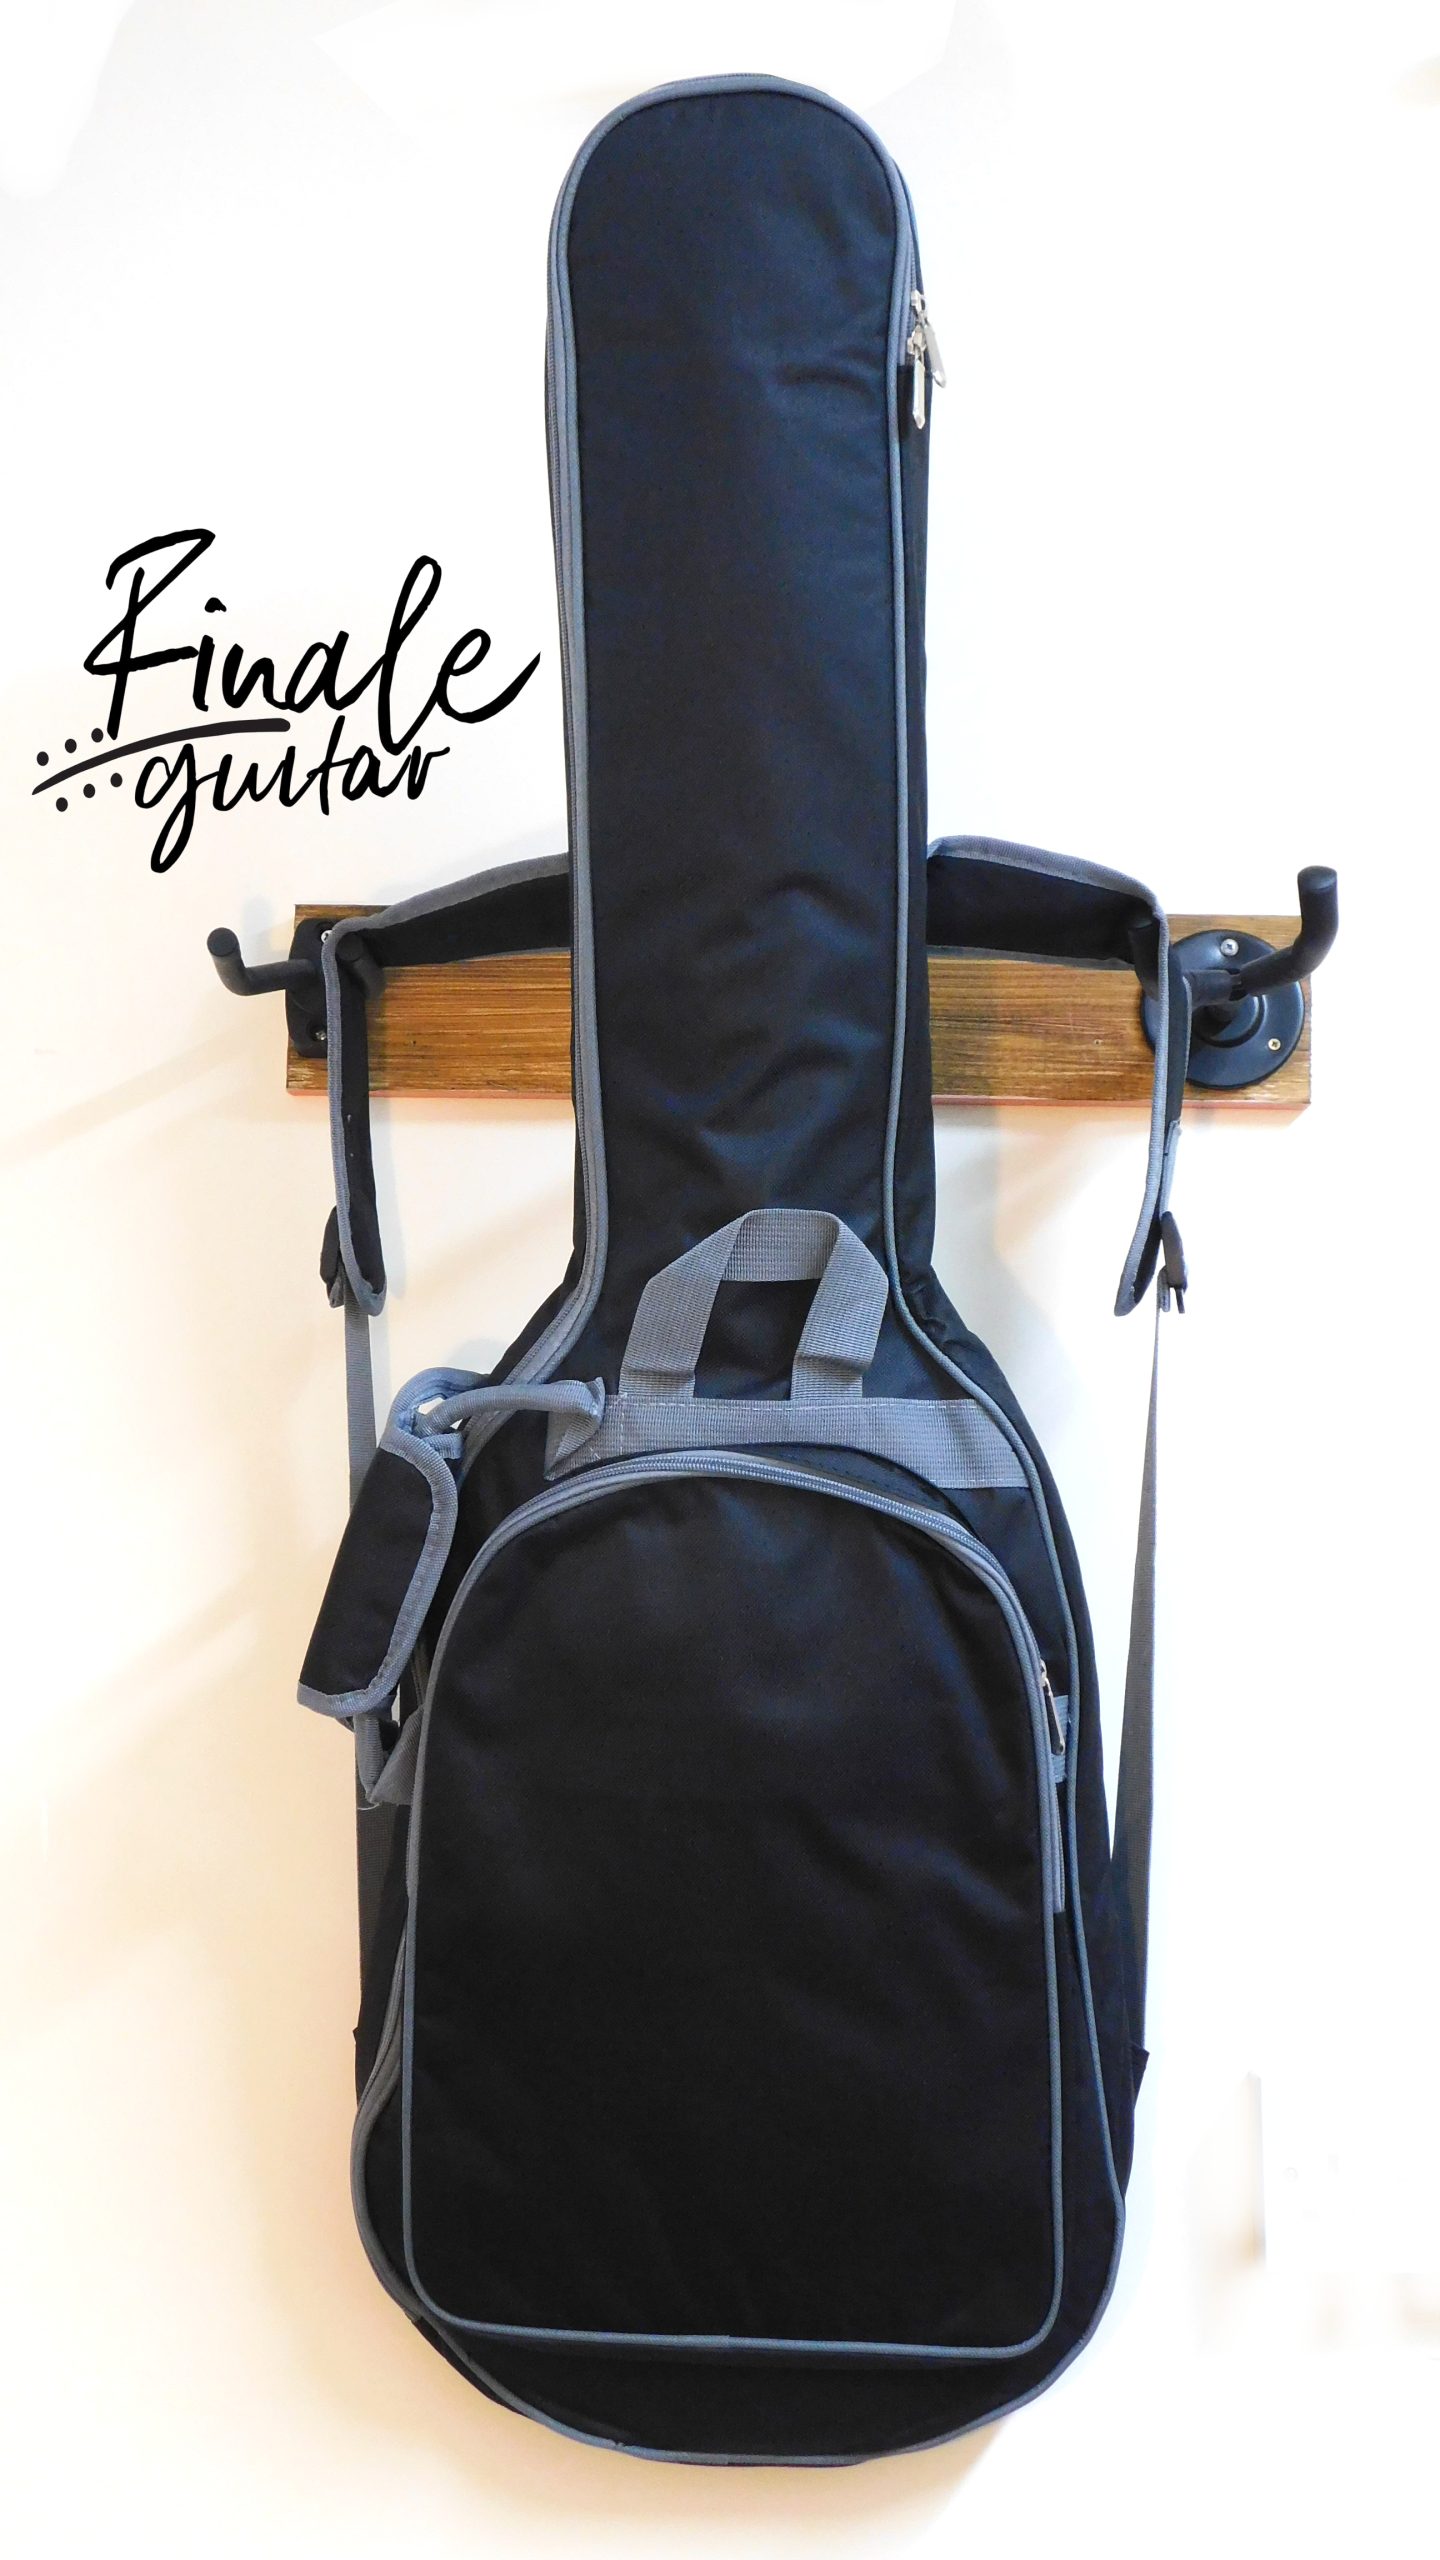 Padded cheap electric guitar gig bag for sale in our online guitar shop based in Sheffield